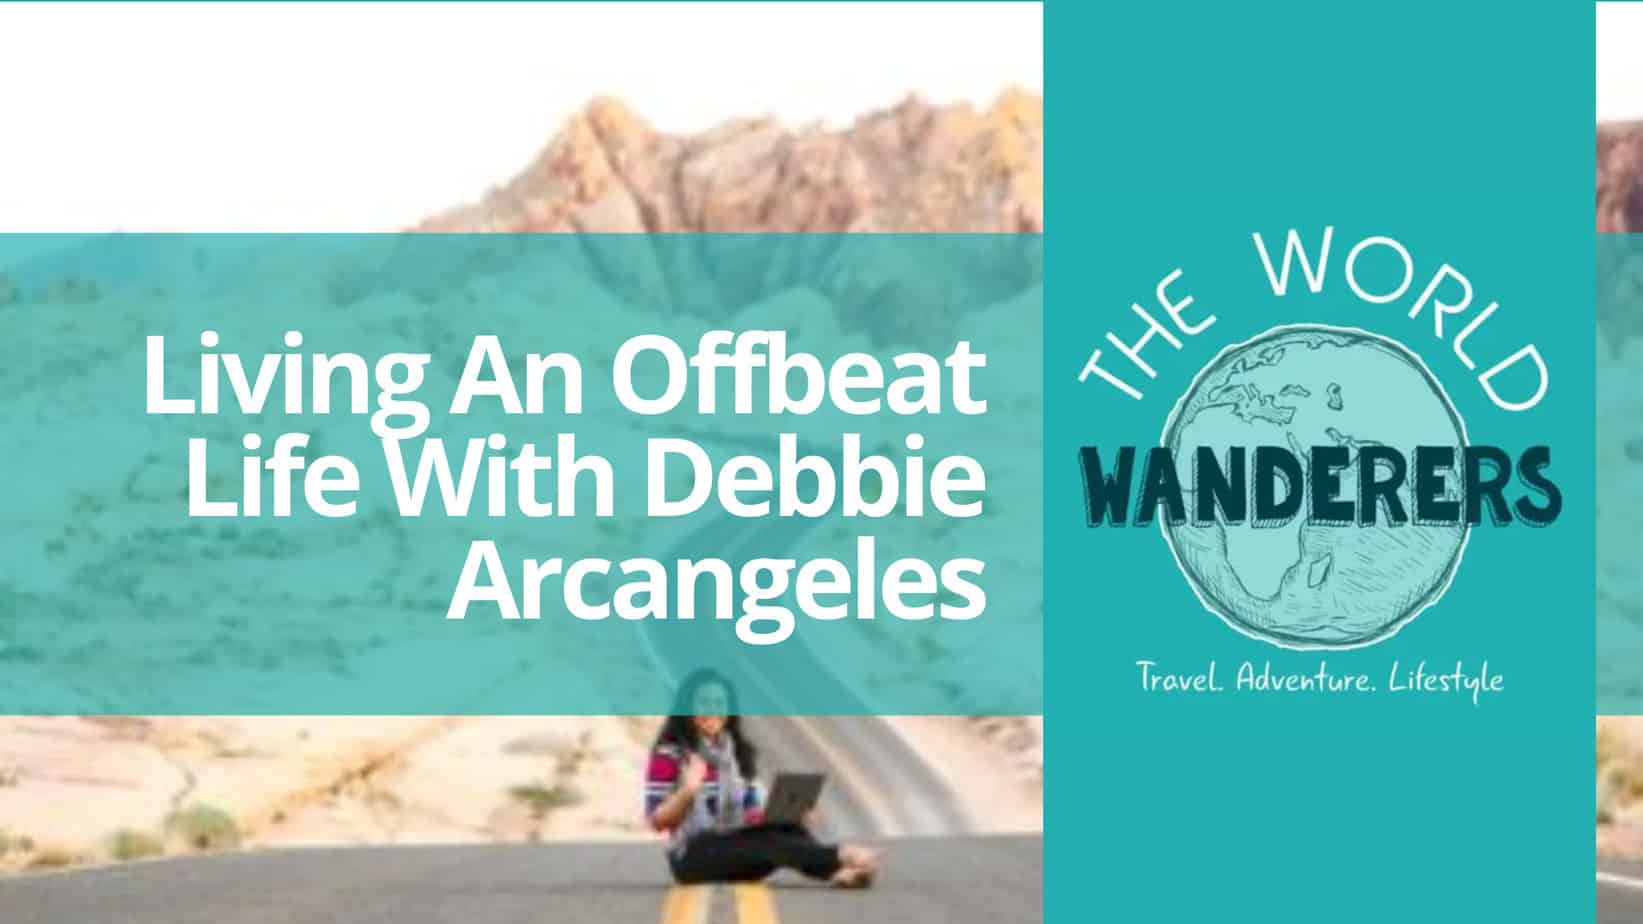 Living An Offbeat Life With Debbie Arcangeles